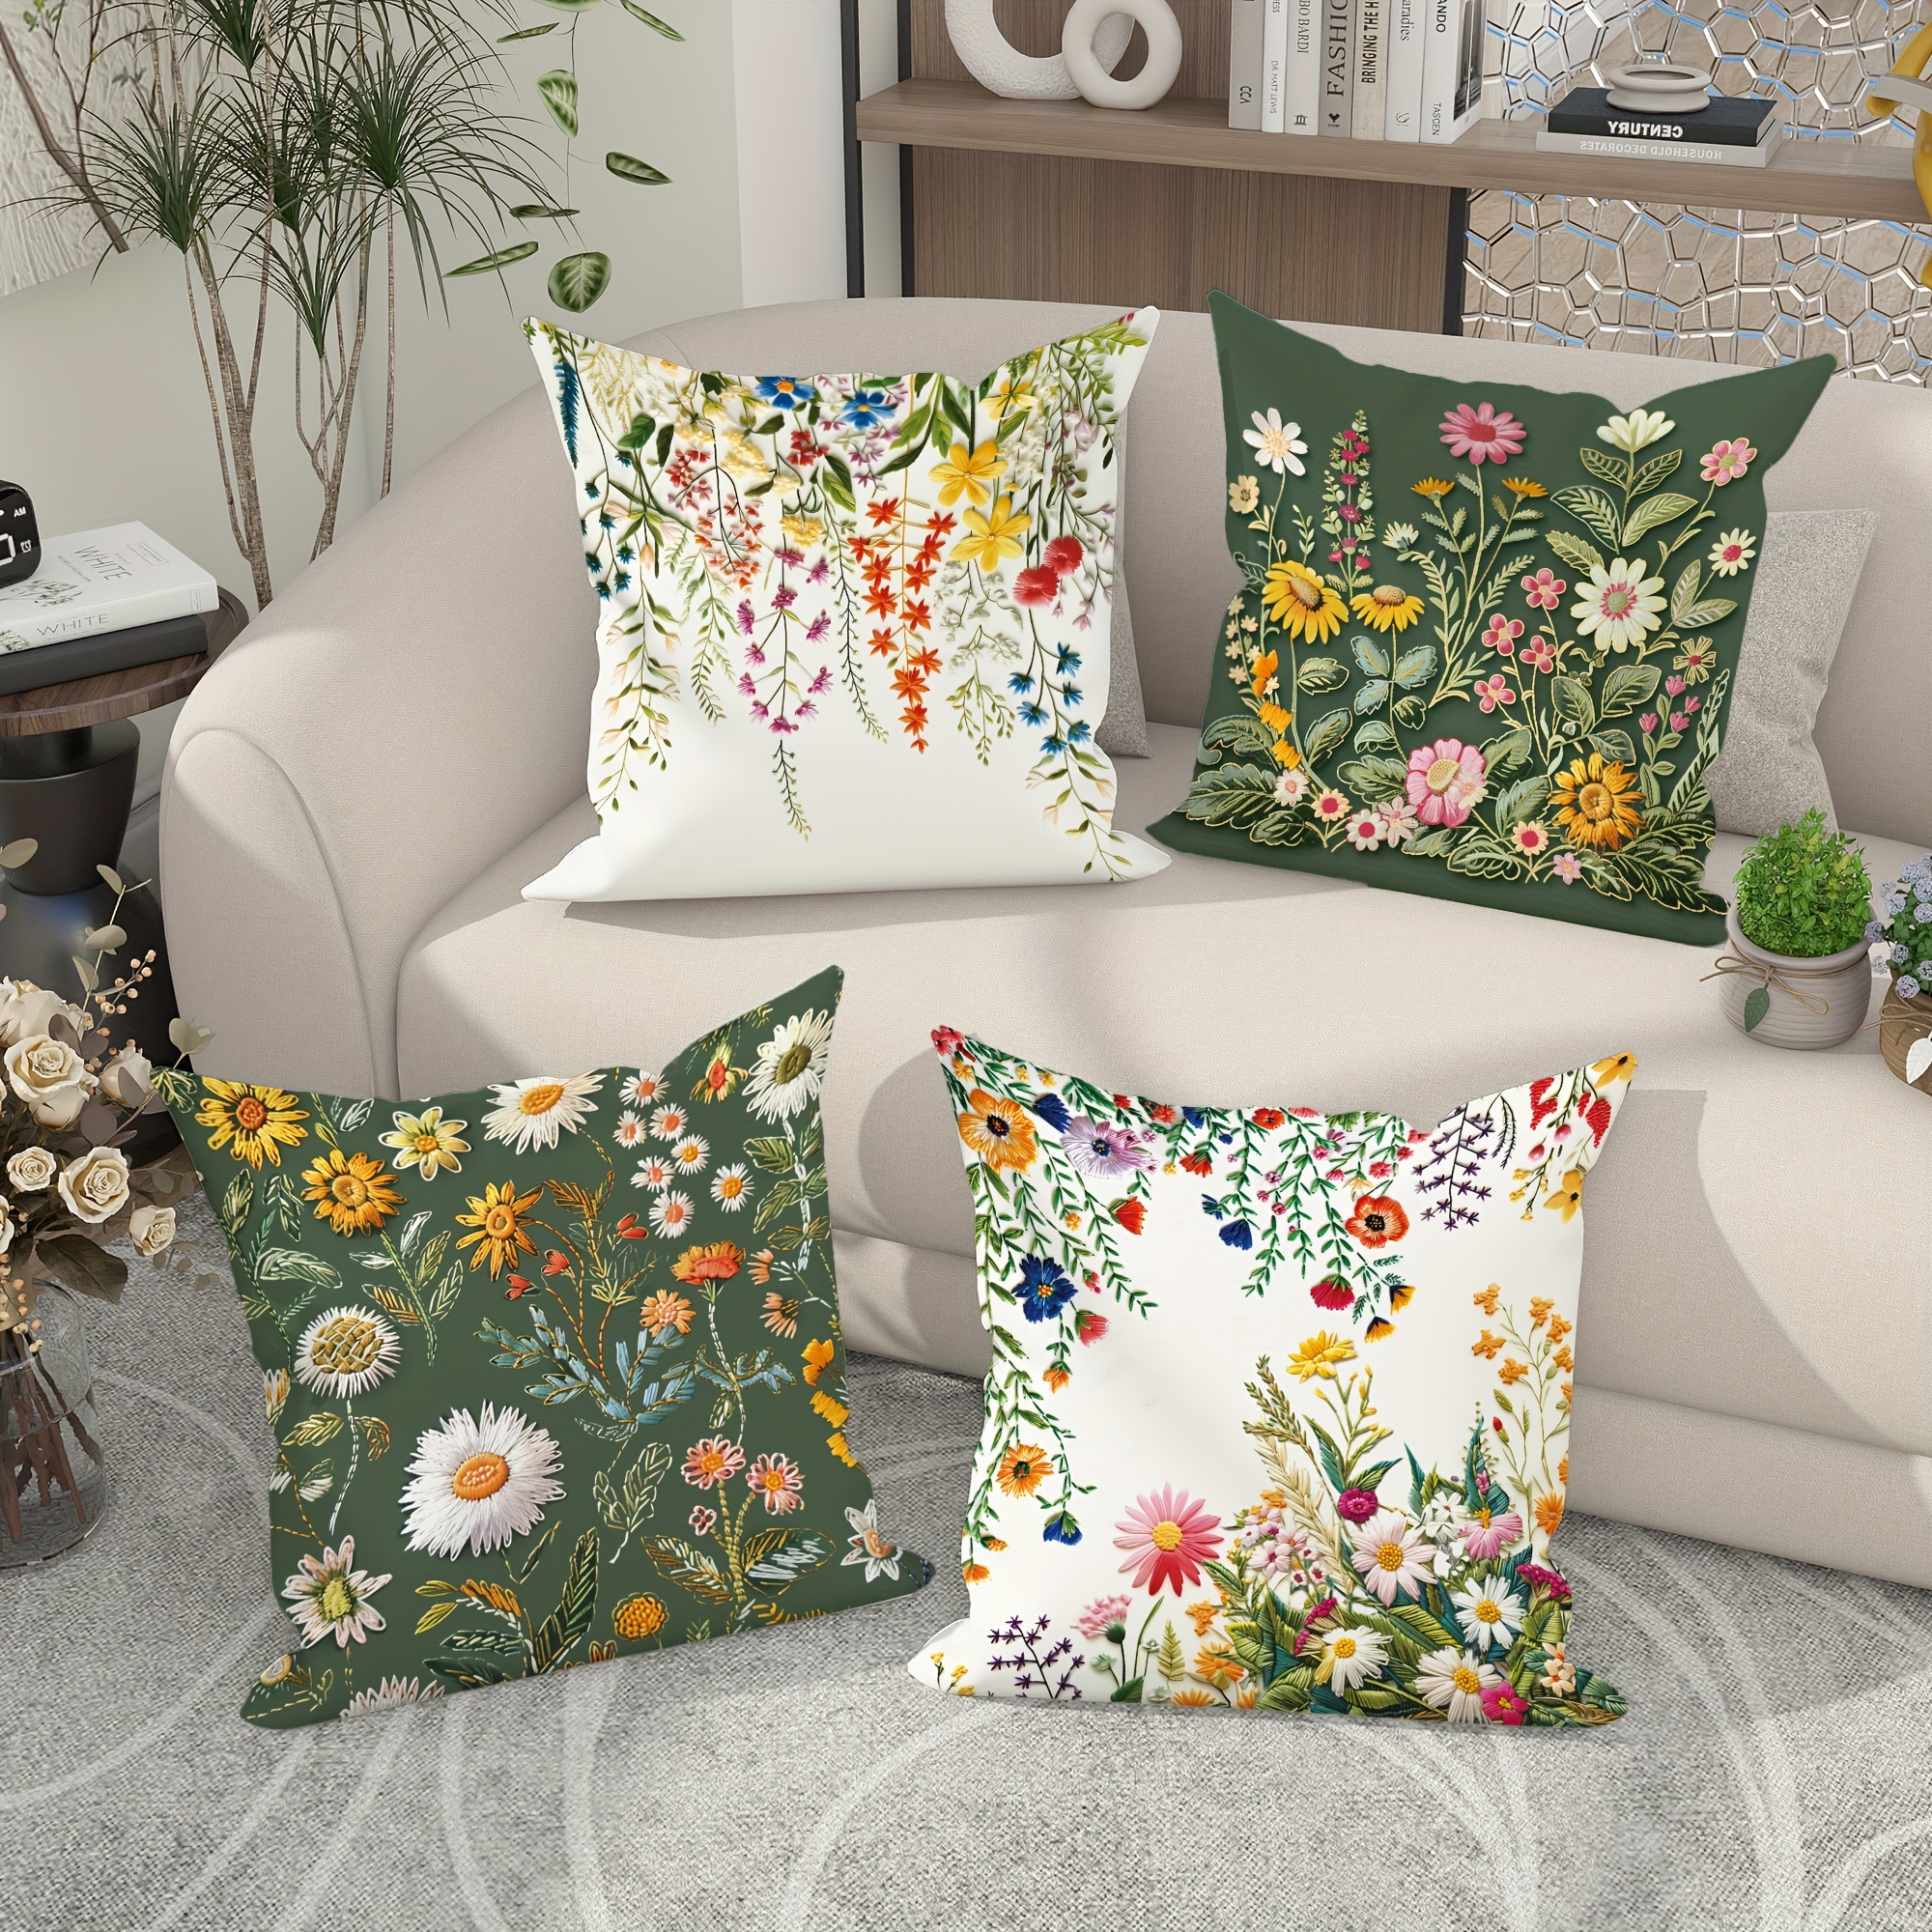 

Country-rustic Style Throw Pillow Covers Set Of 4, Floral Embroidery Pattern, Zippered, Machine Washable, Woven Polyester Decorative Pillowcases For Living Room Sofa, 18x18 Inches